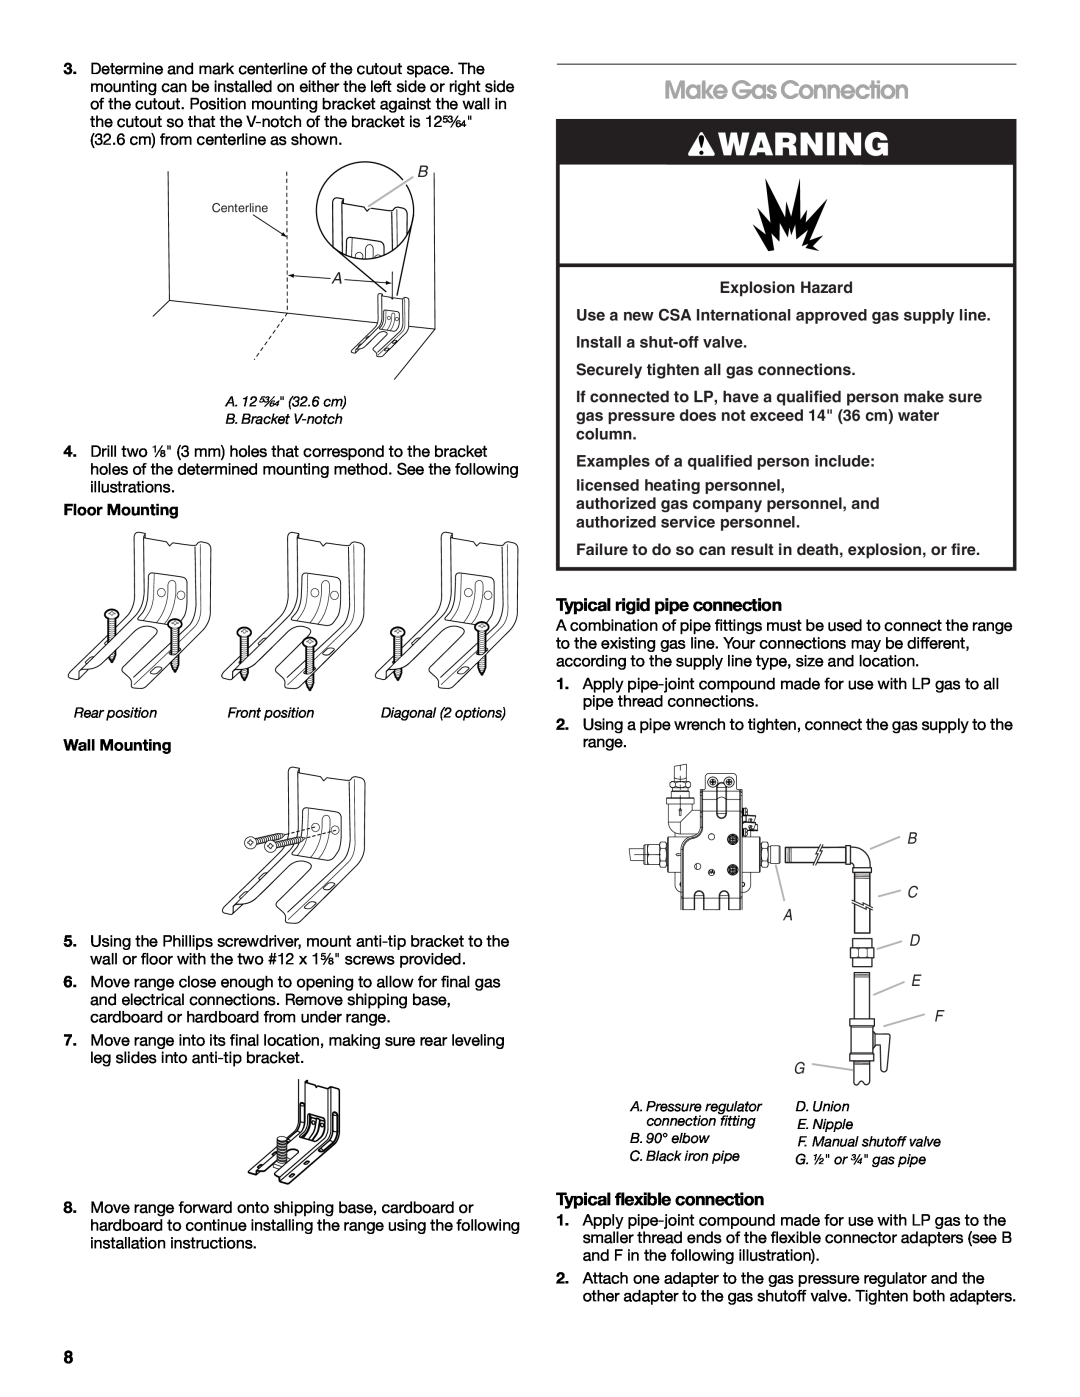 Whirlpool W10477533B Make Gas Connection, Typical rigid pipe connection, Typical flexible connection, Floor Mounting 